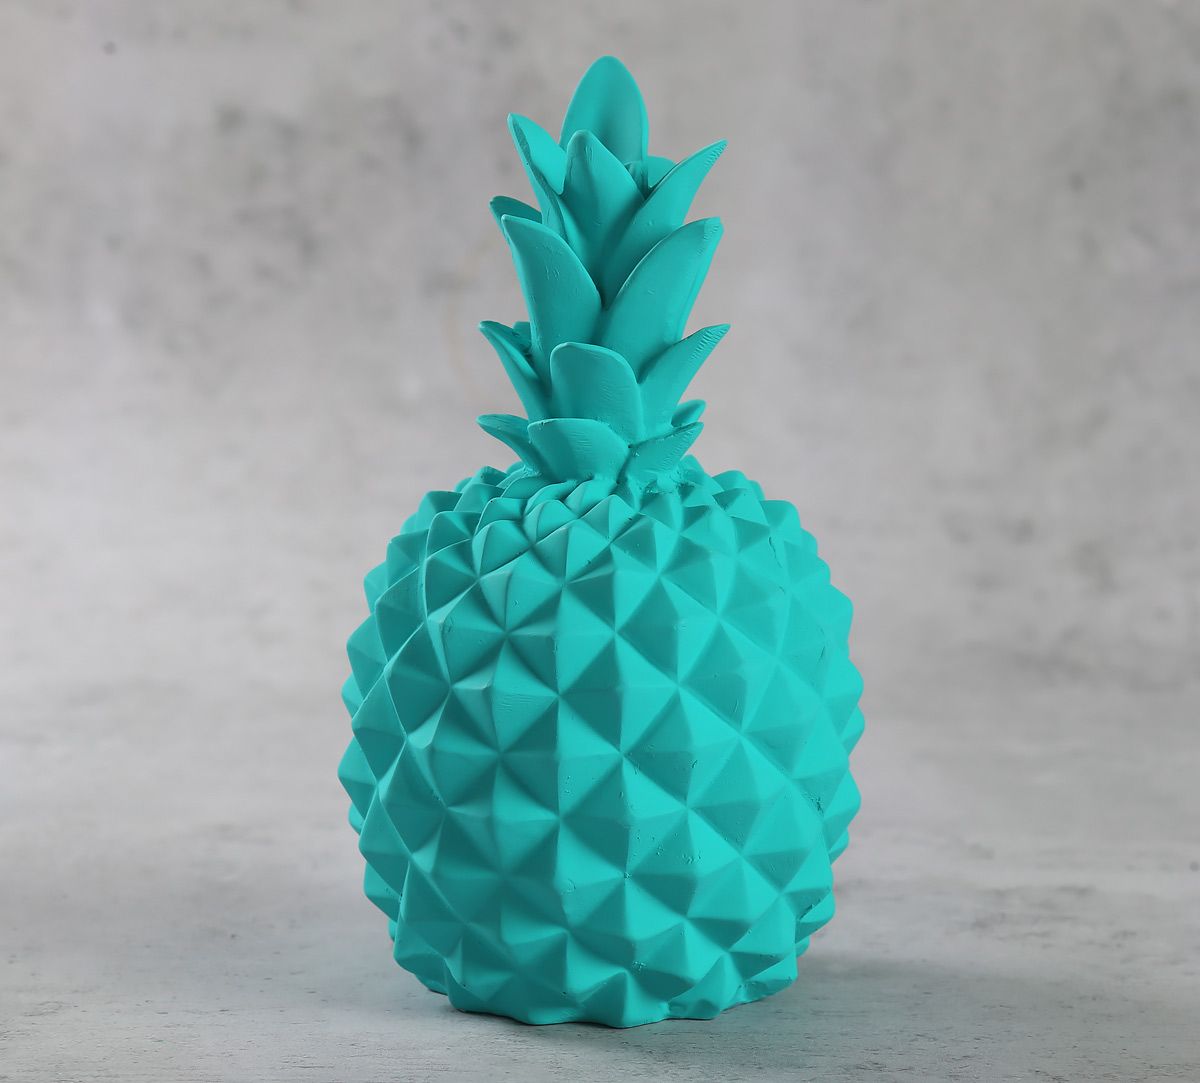 Shop for Pineapple decor accent India Circus